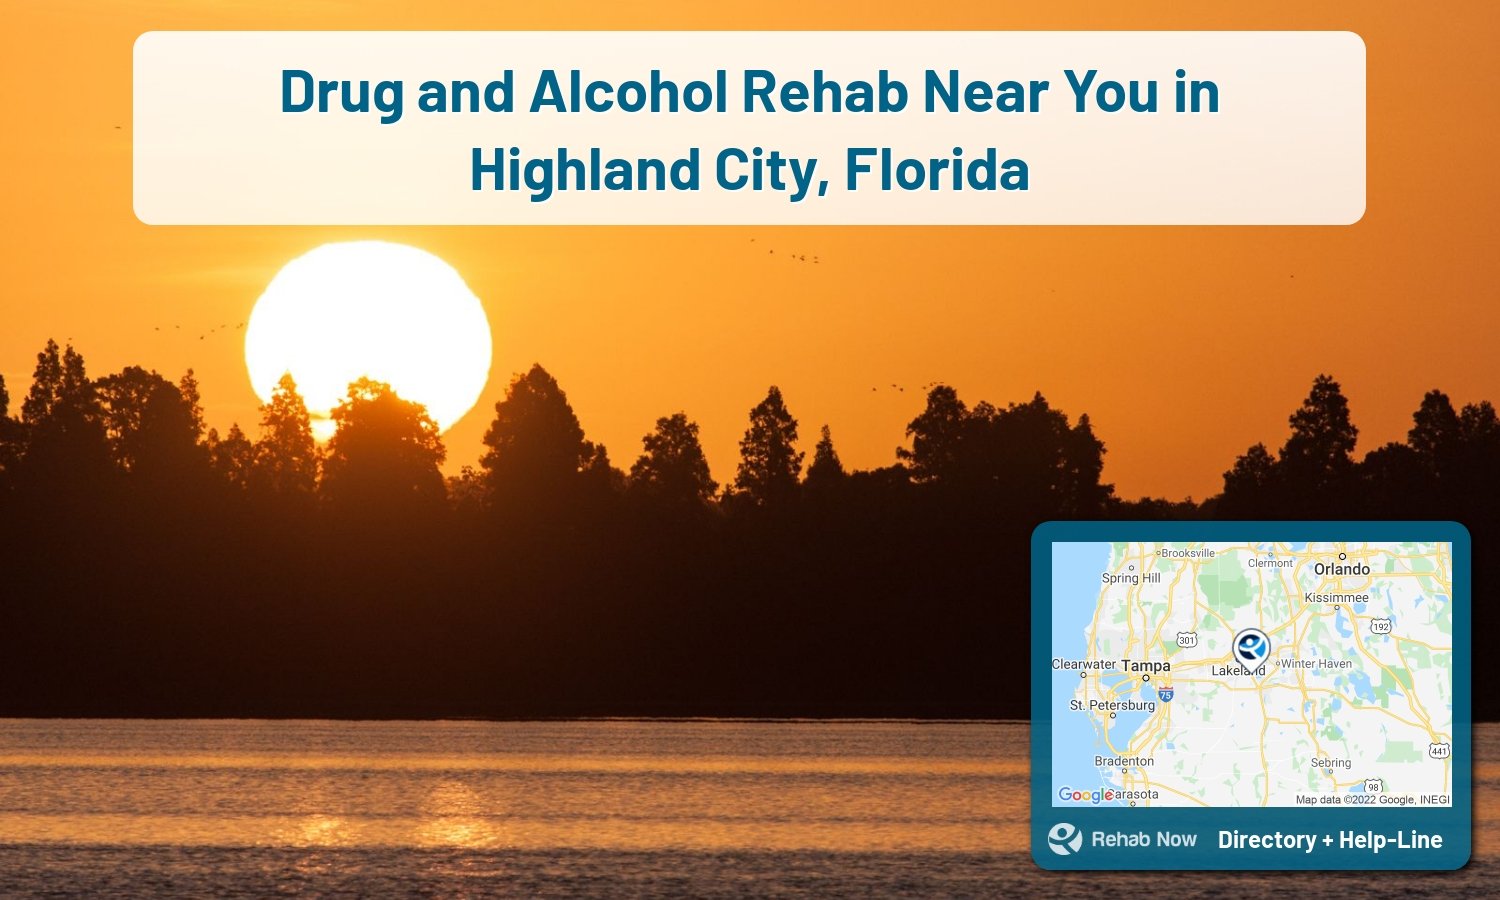 Our experts can help you find treatment now in Highland City, Florida. We list drug rehab and alcohol centers in Florida.